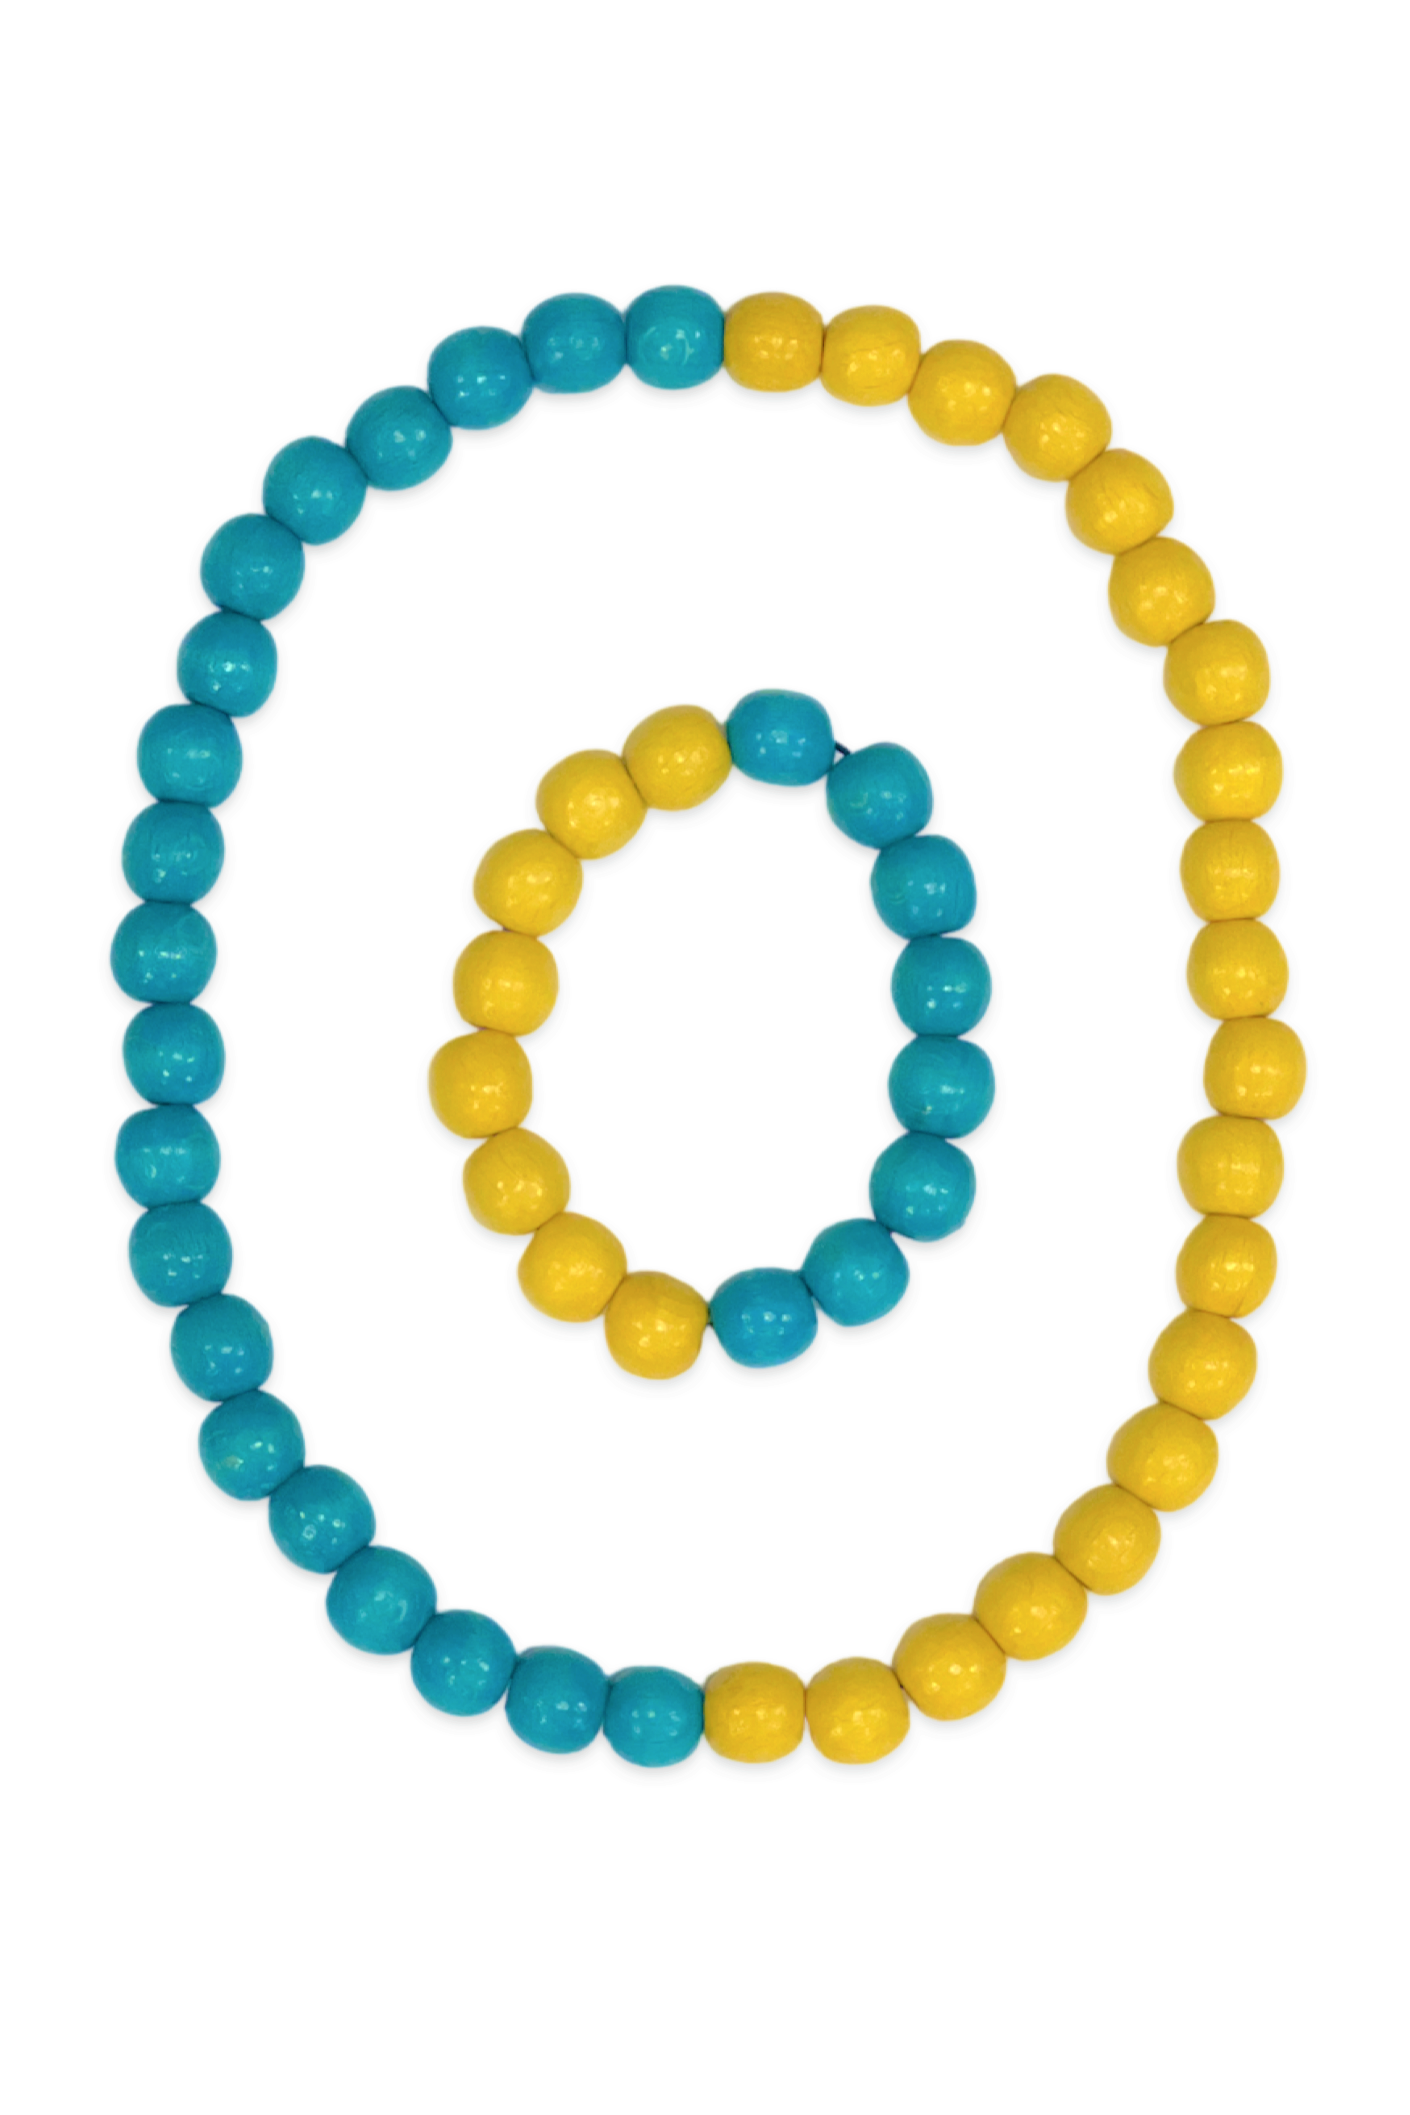 Artisan crafted wood-bead jewelry set. Blue and yellow